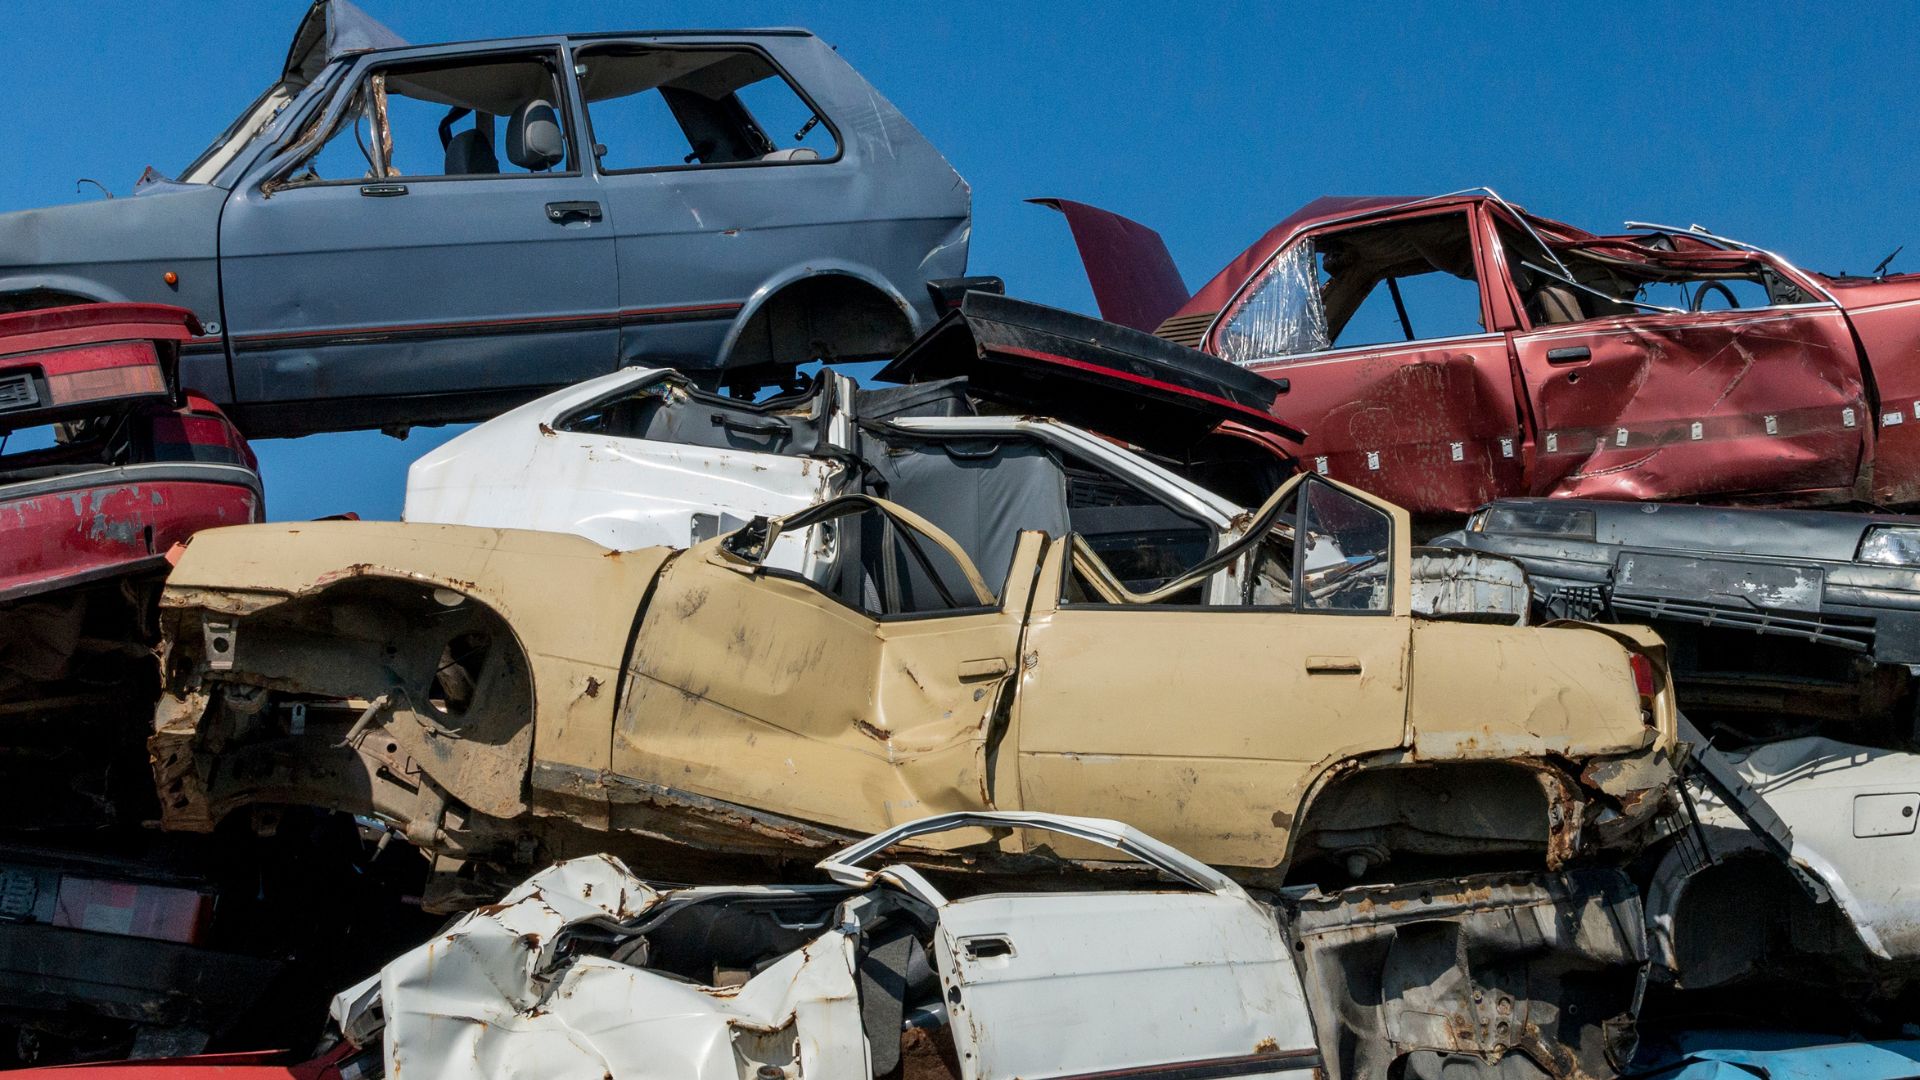 Classic Car Industry Could be Wounded by New National Scrappage Scheme Under a Labour Government